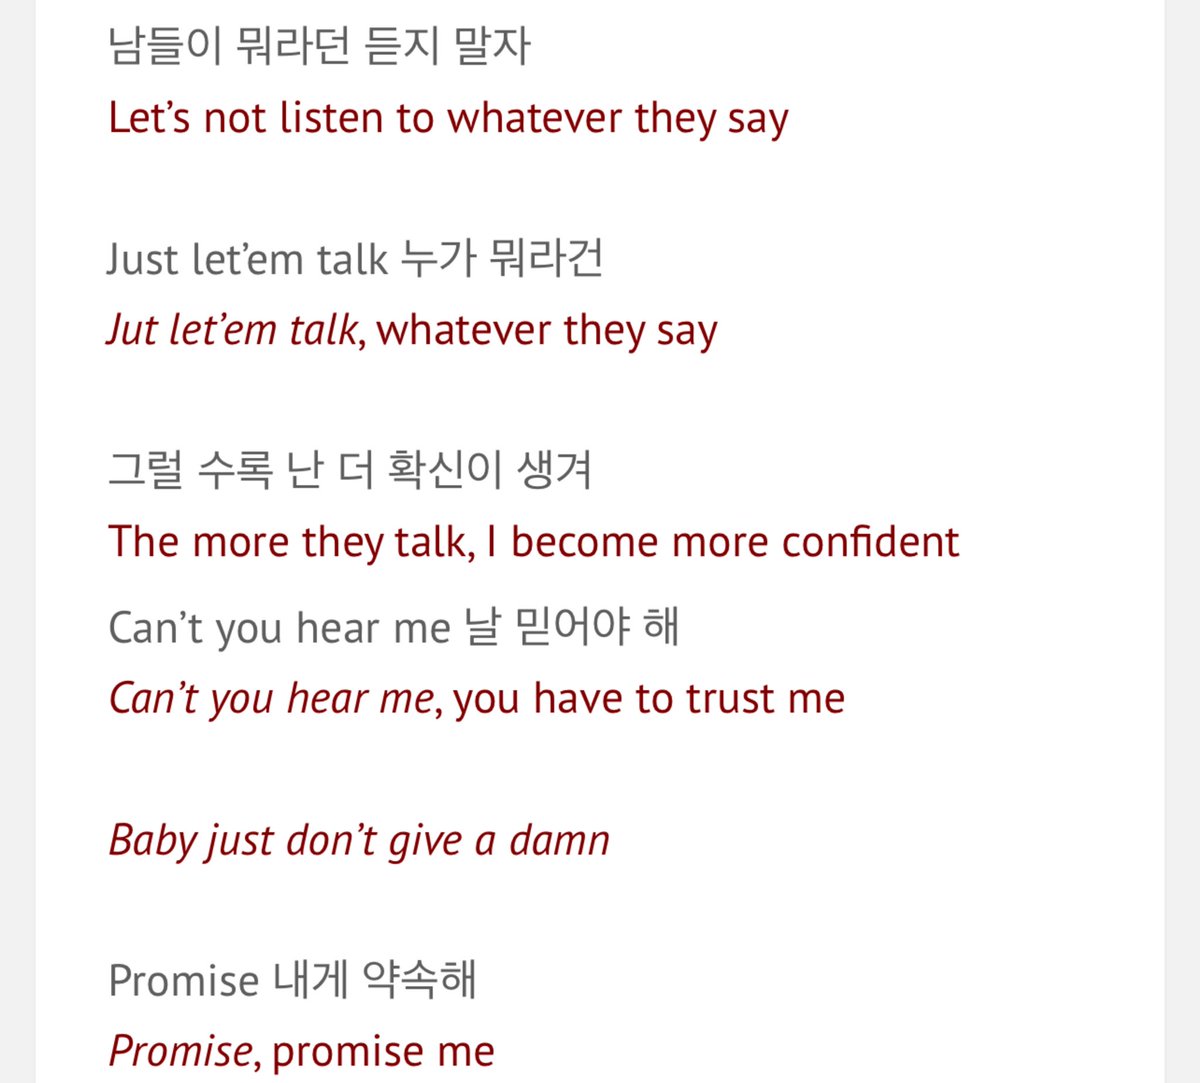 ‘just let'em talk, whatever they say
the more they talk, i become more confident’ — BTS, love maze.